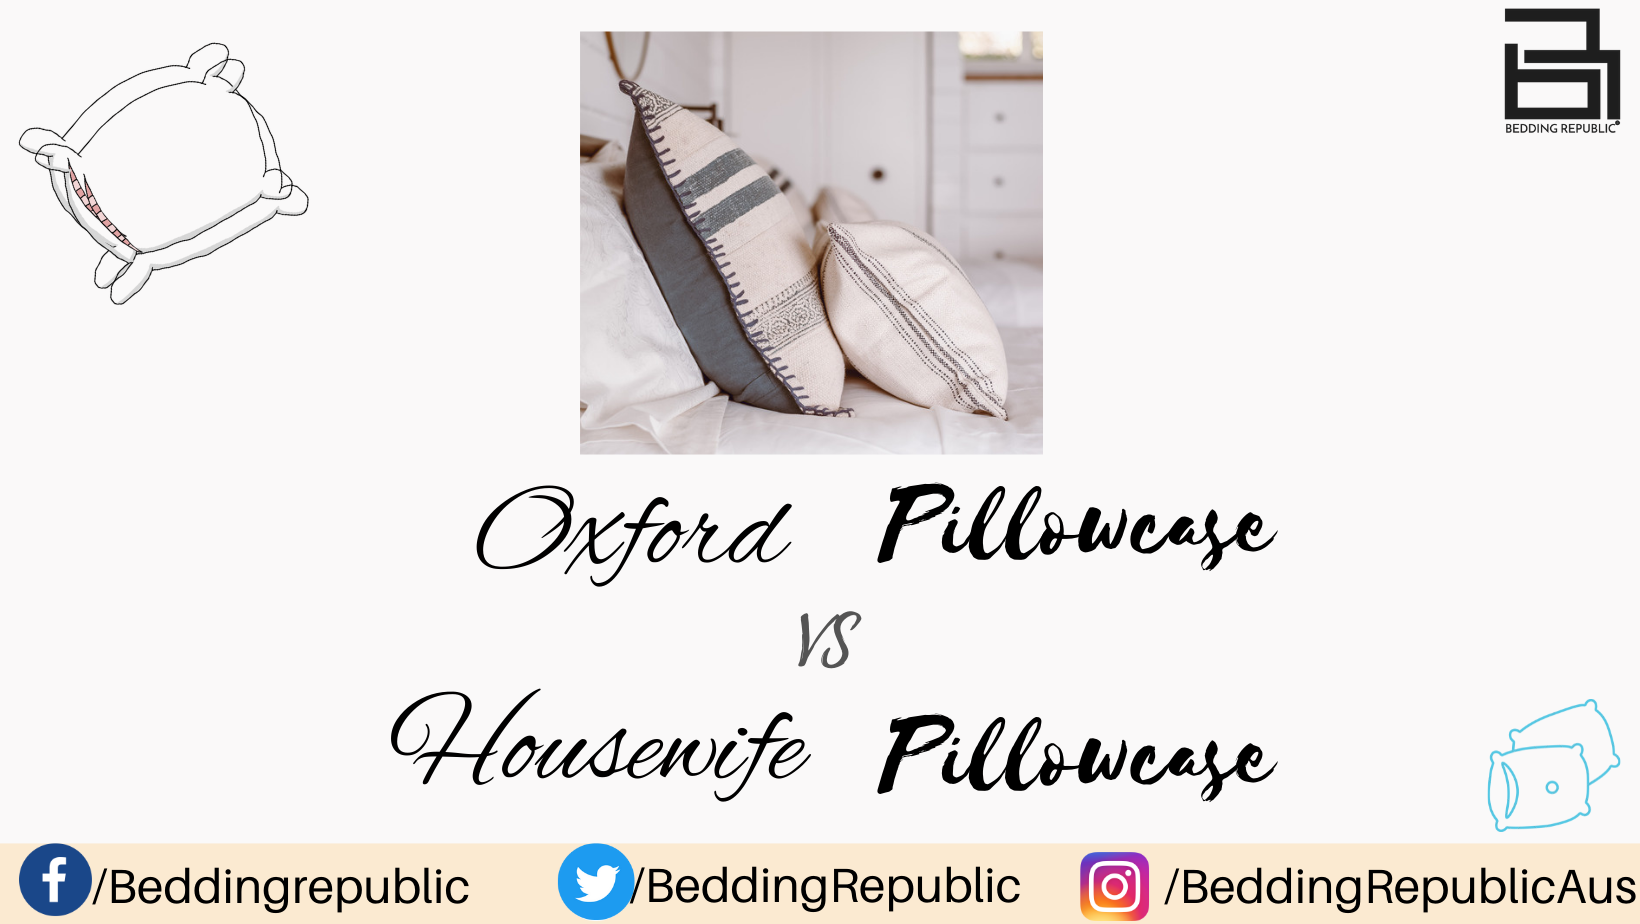 Oxford v Housewife Pillowcases - The Difference